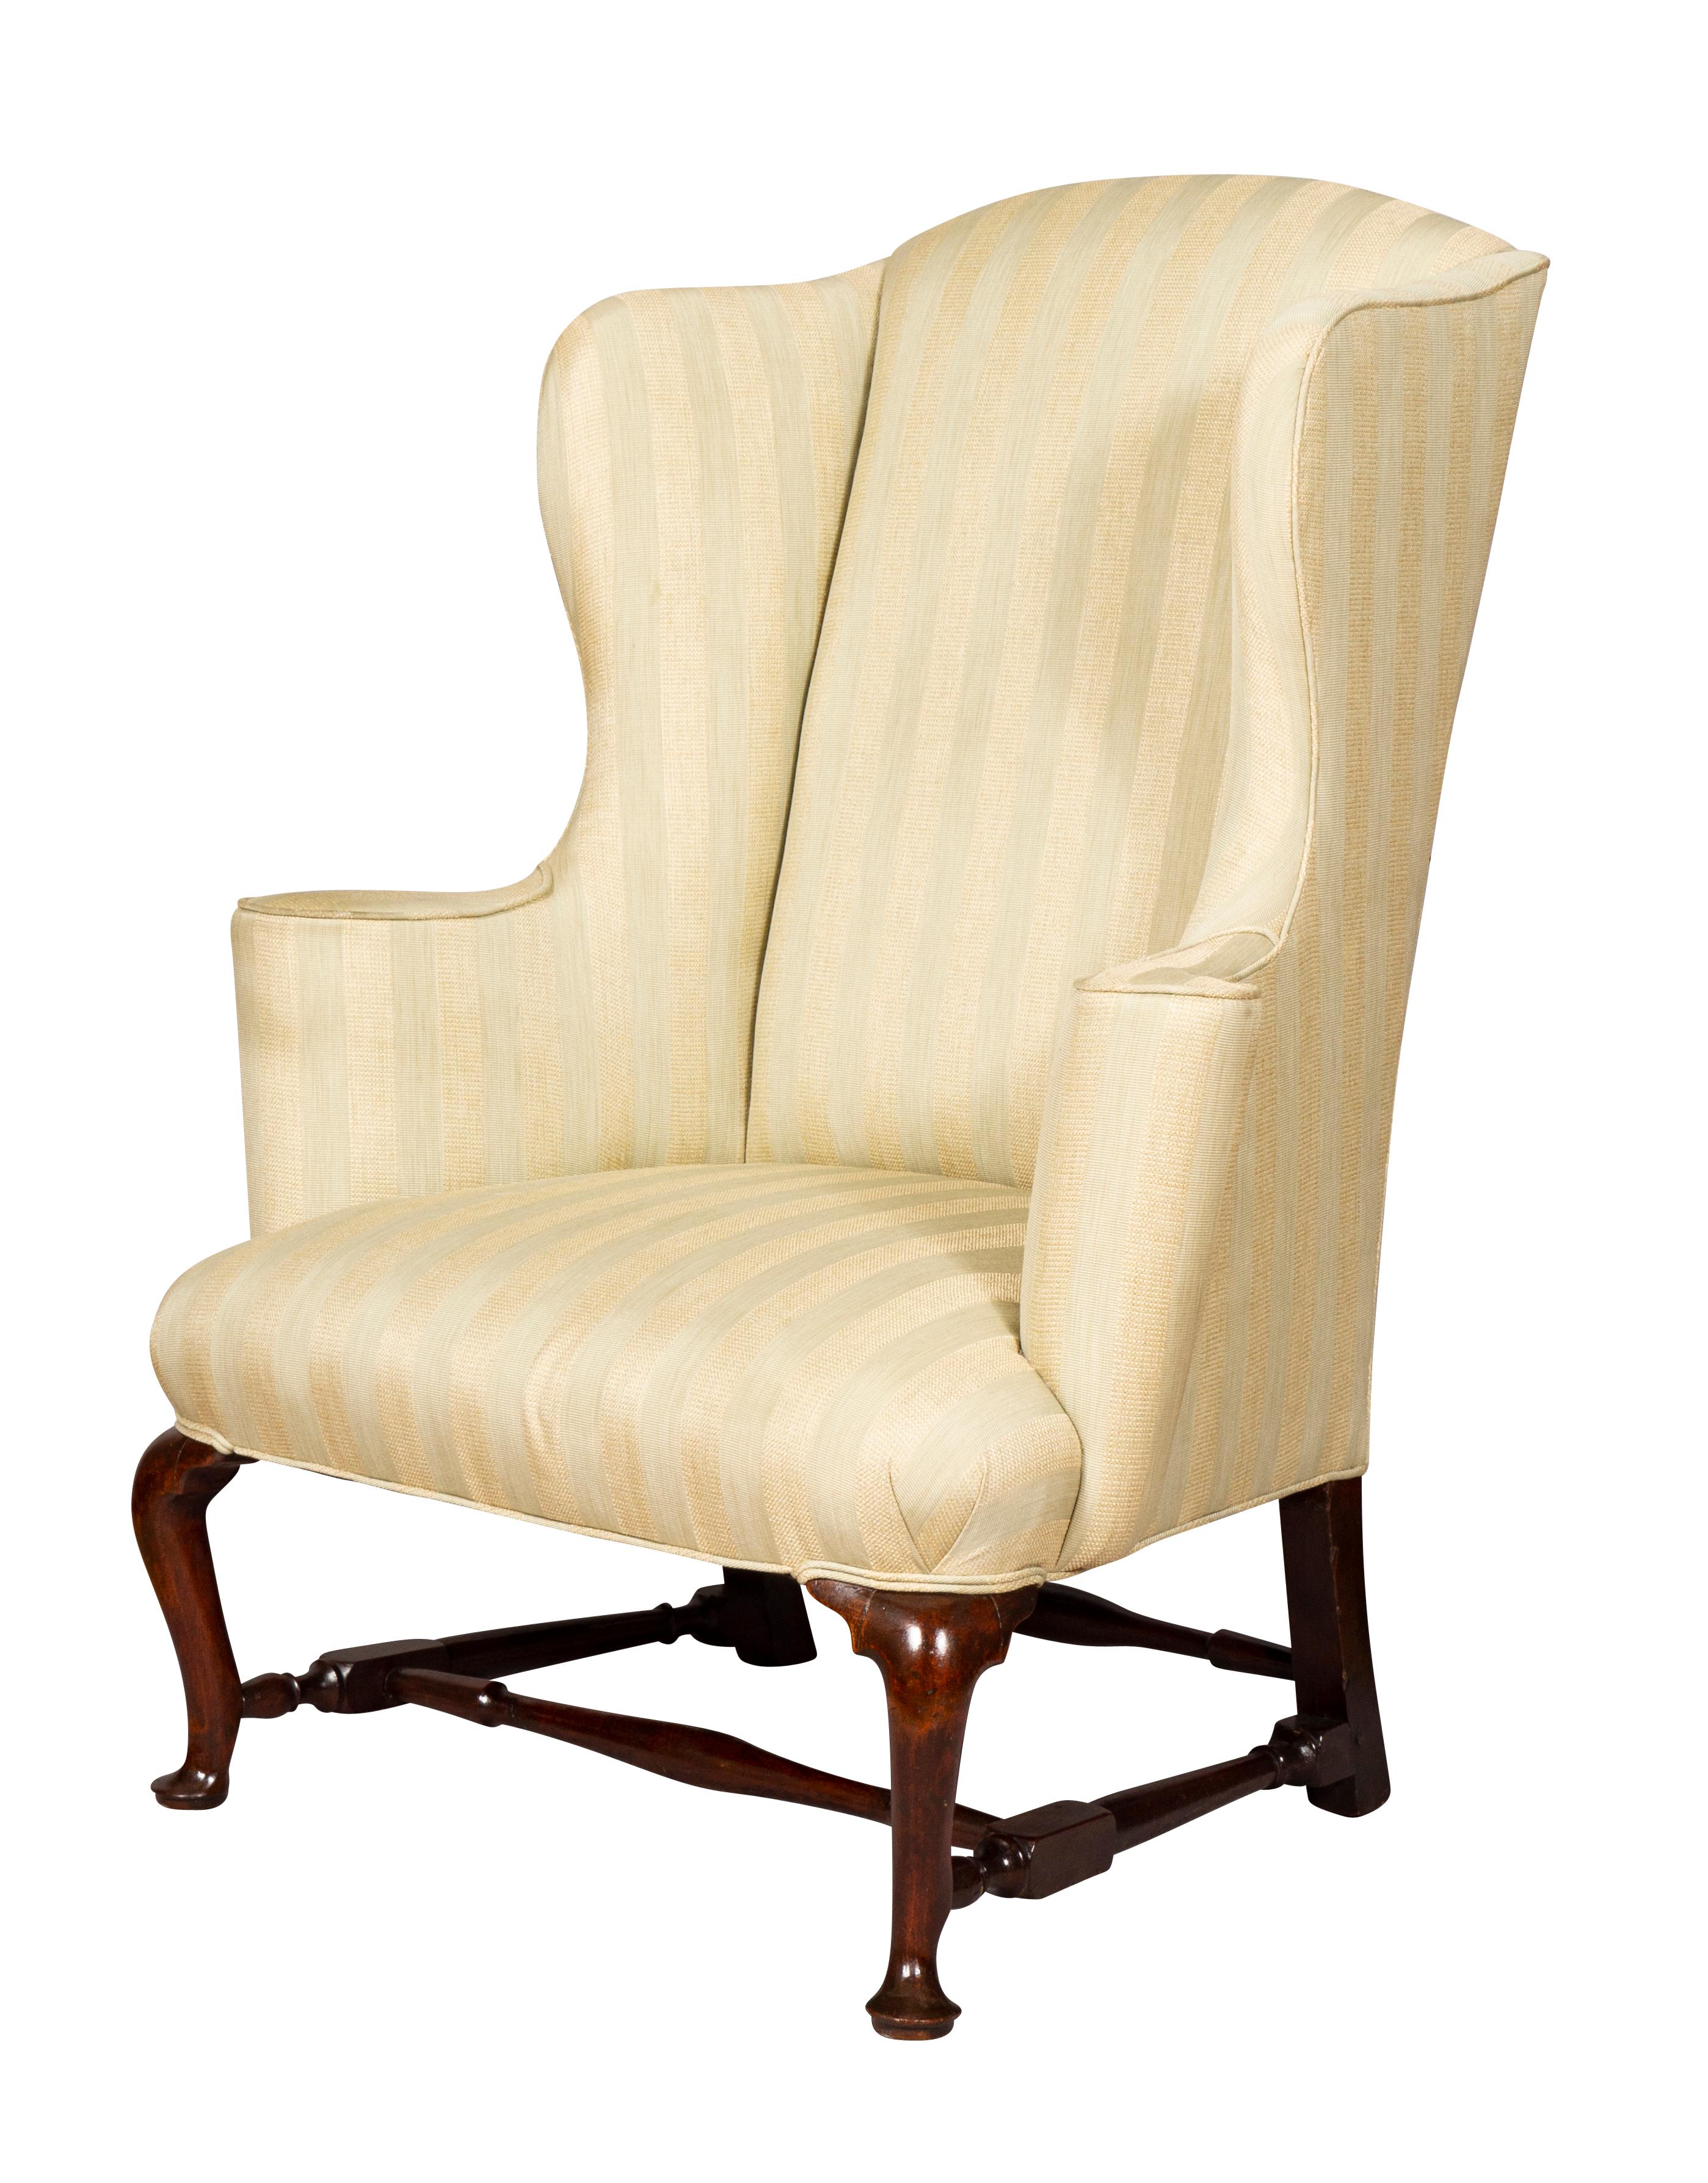 Massachusetts Queen Anne Mahogany Wing Chair 1